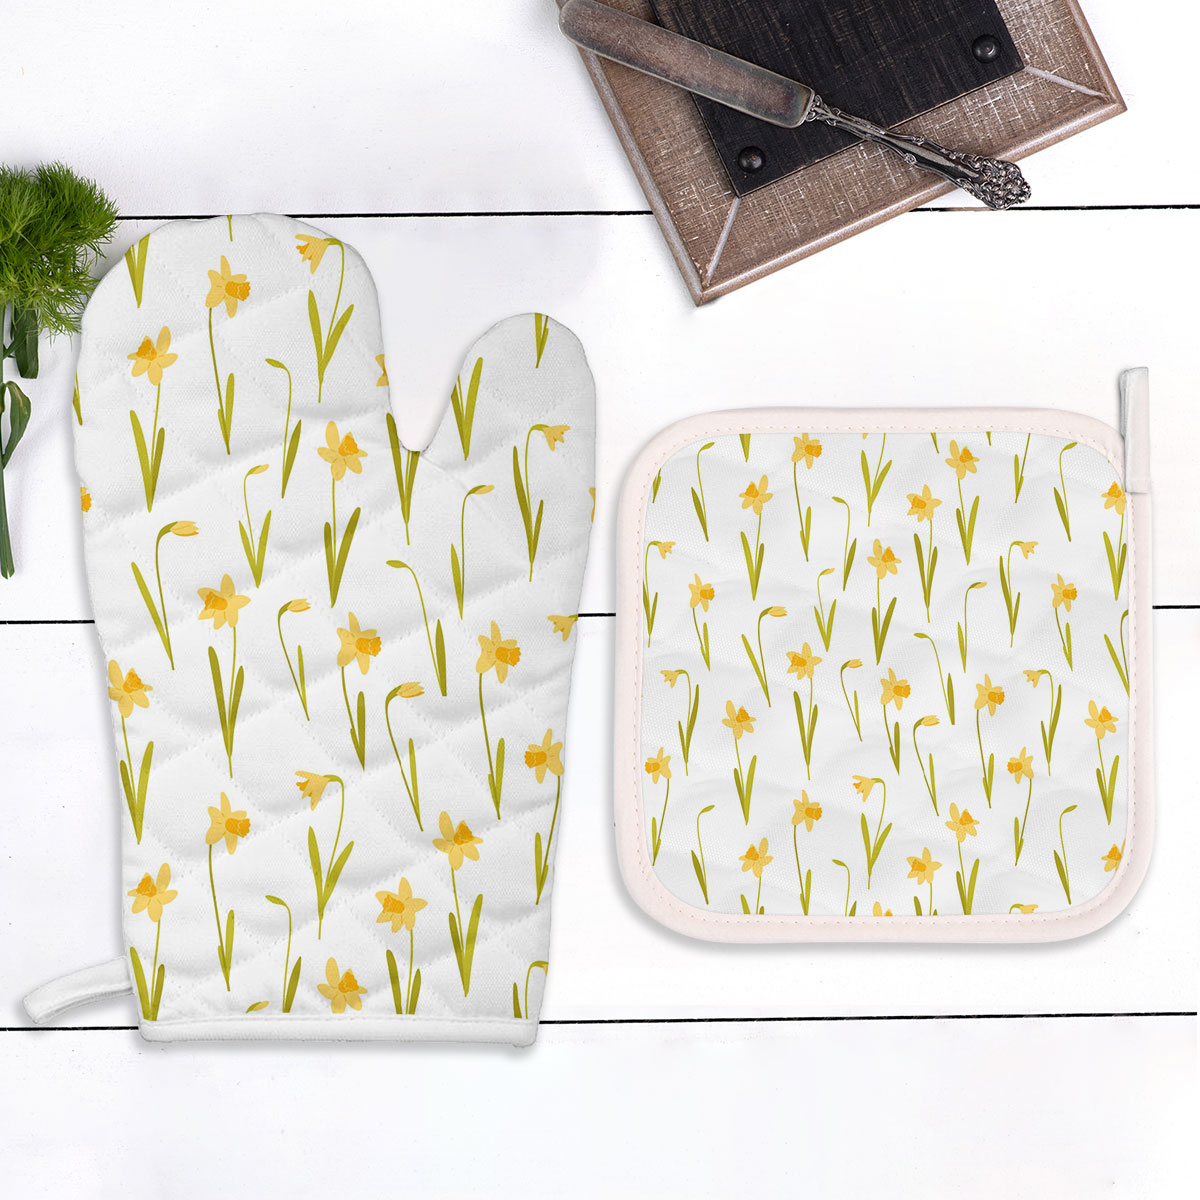 Yellow Daffodils On White Background Oven Mitts Pot Holder Set